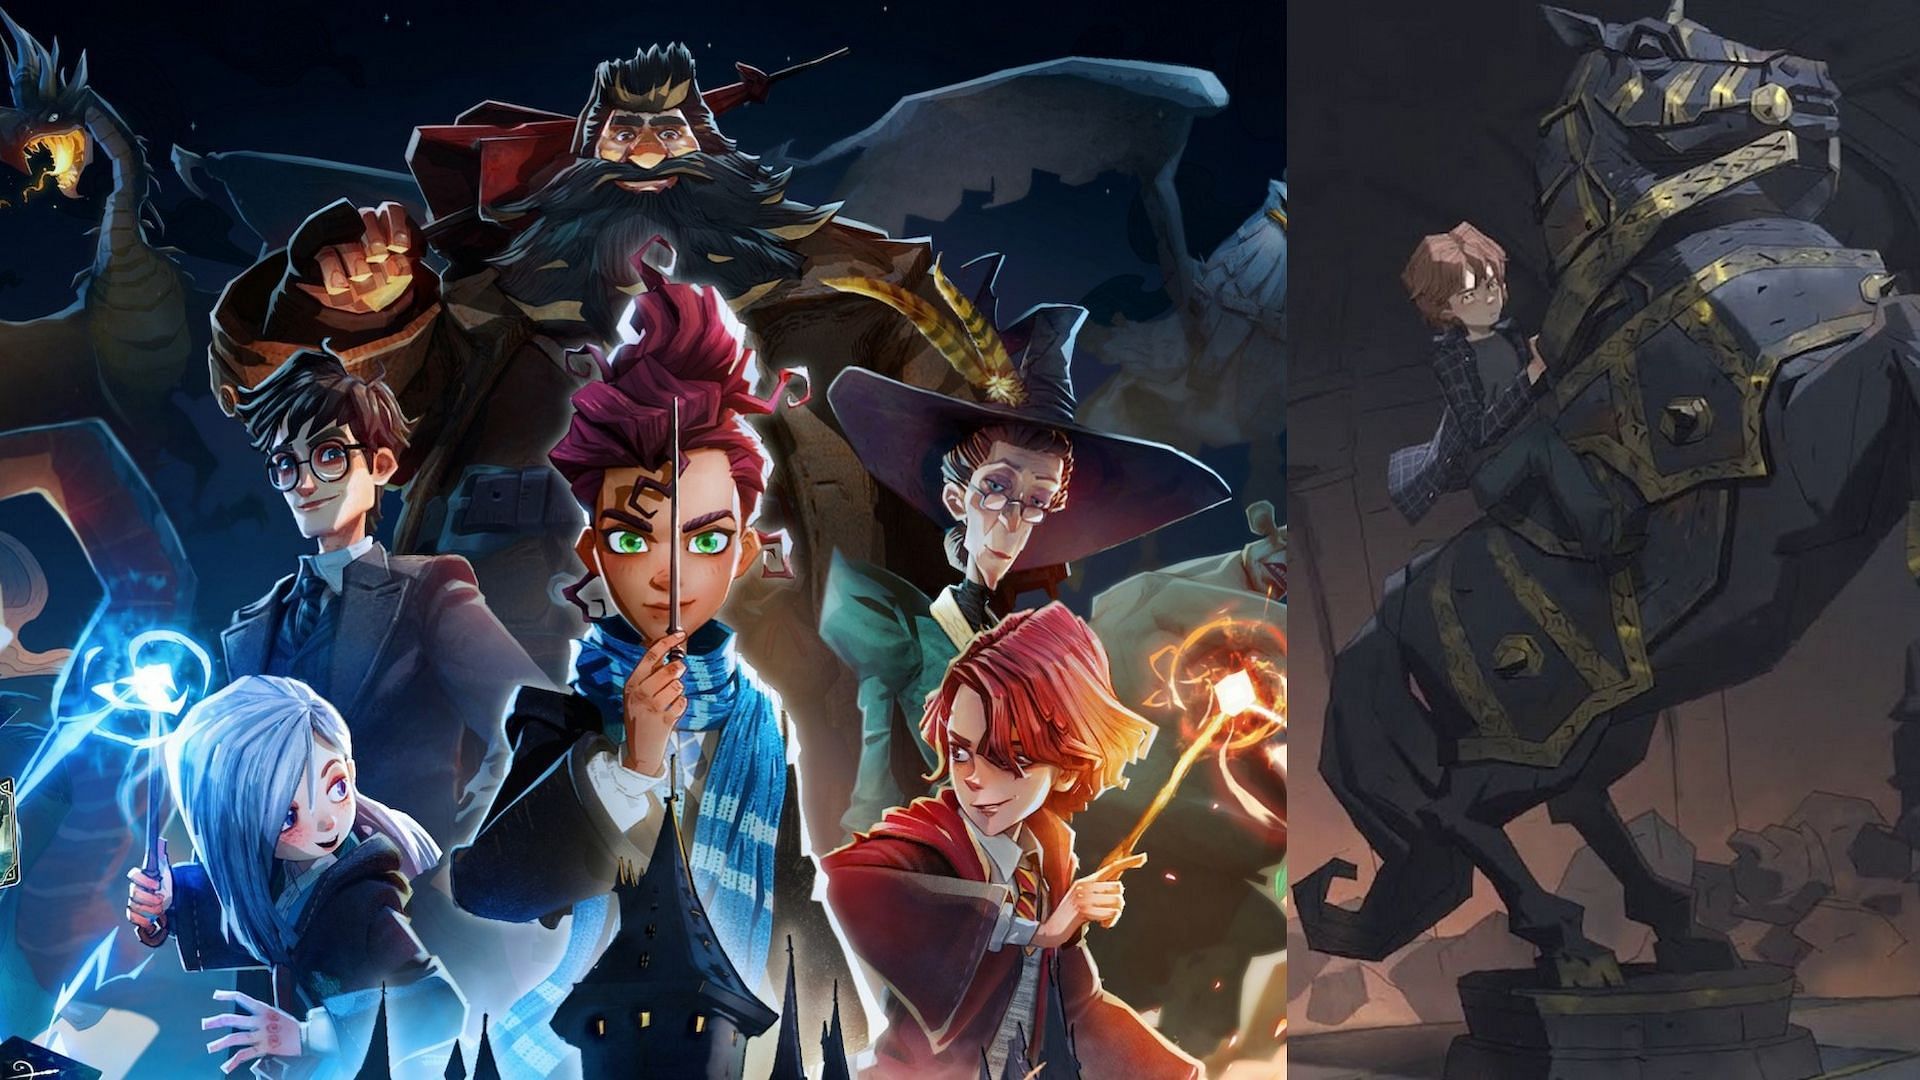 All characters in different poses with some of them wielding wands along with Ron Weasley on the right.